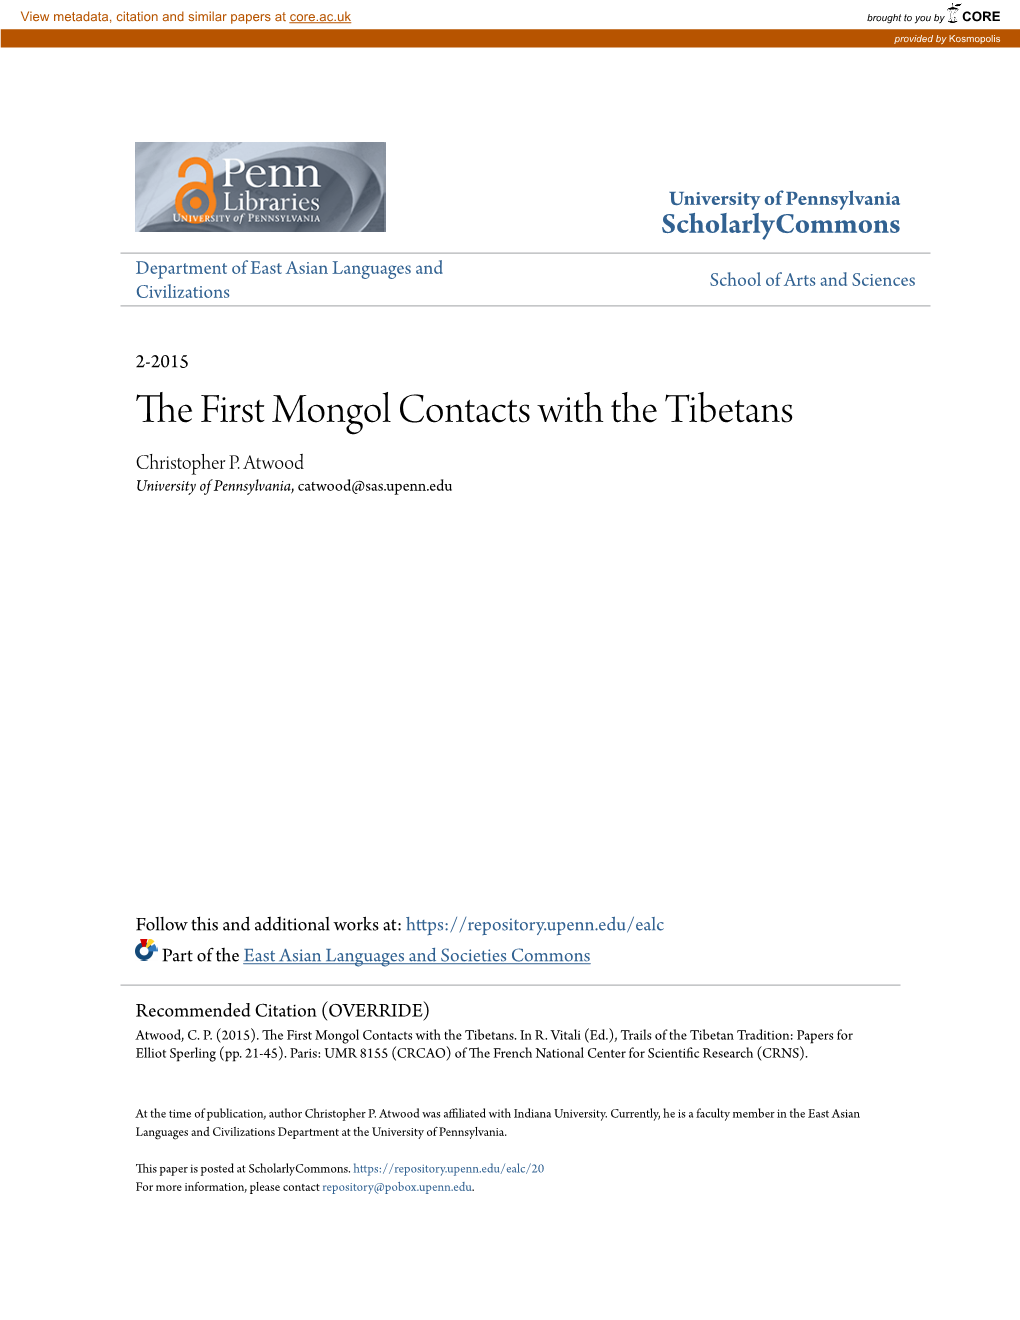 The First Mongol Contacts with the Tibetans1